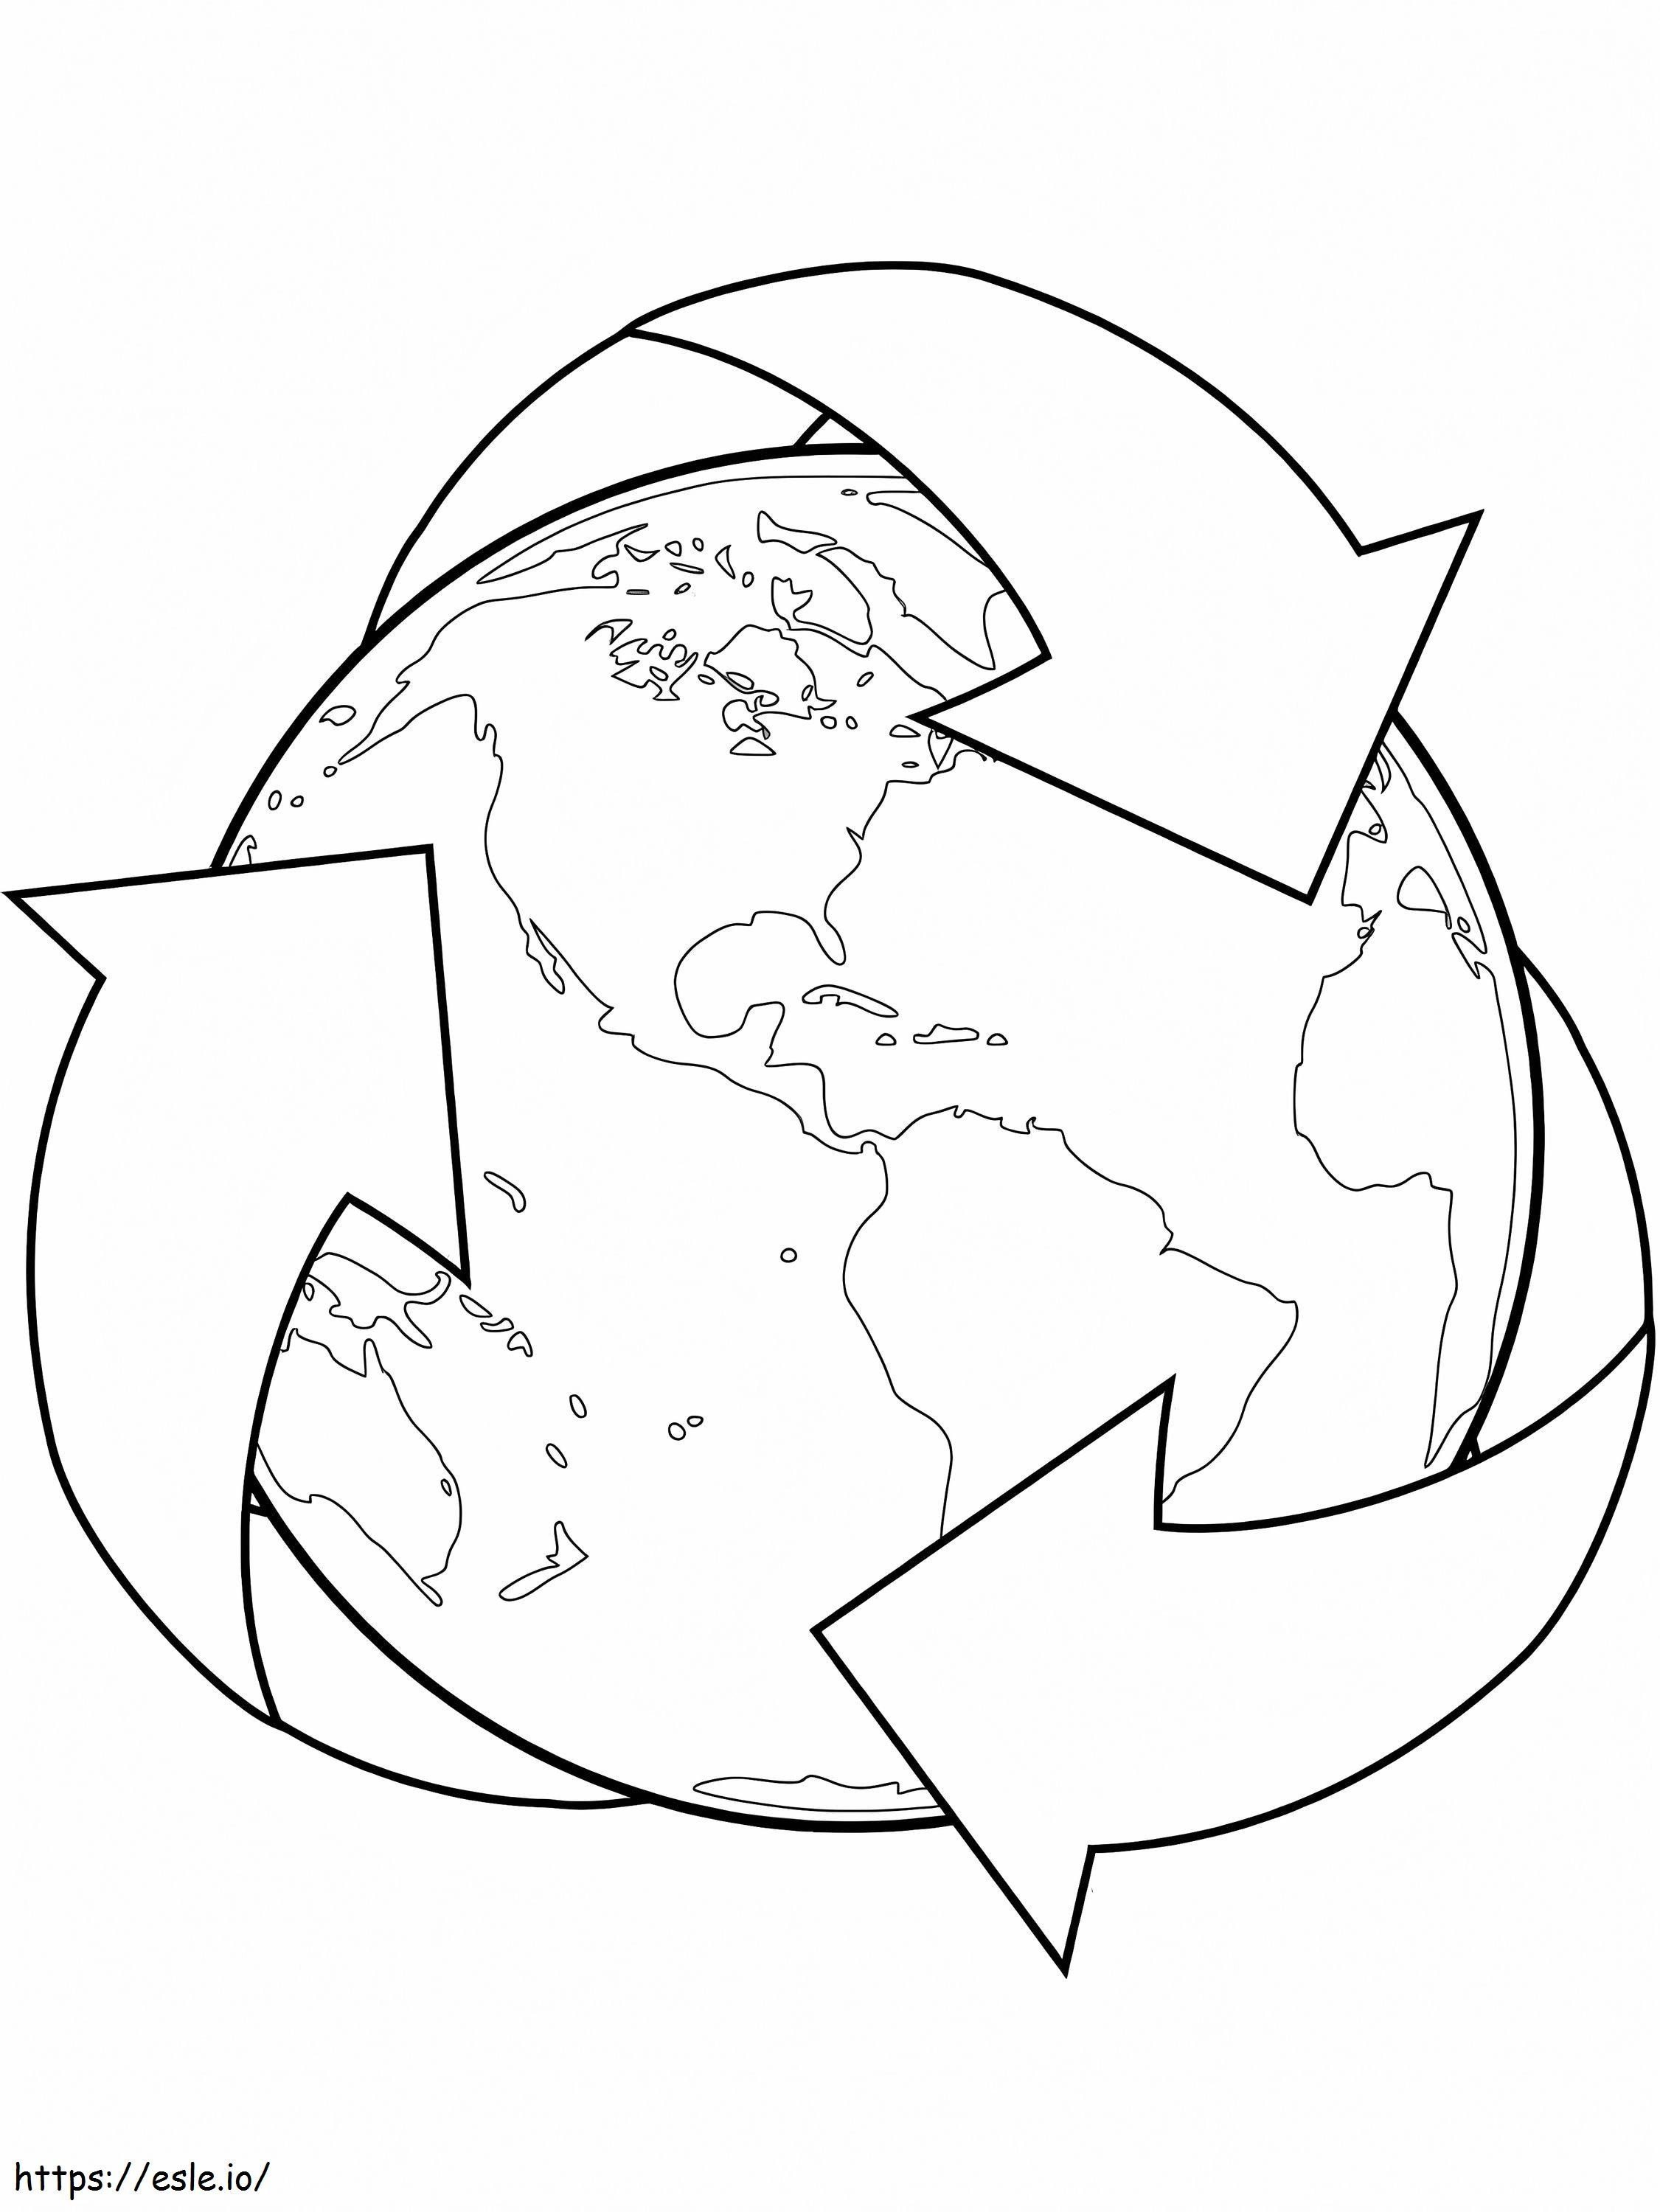 Earth Recycling coloring page